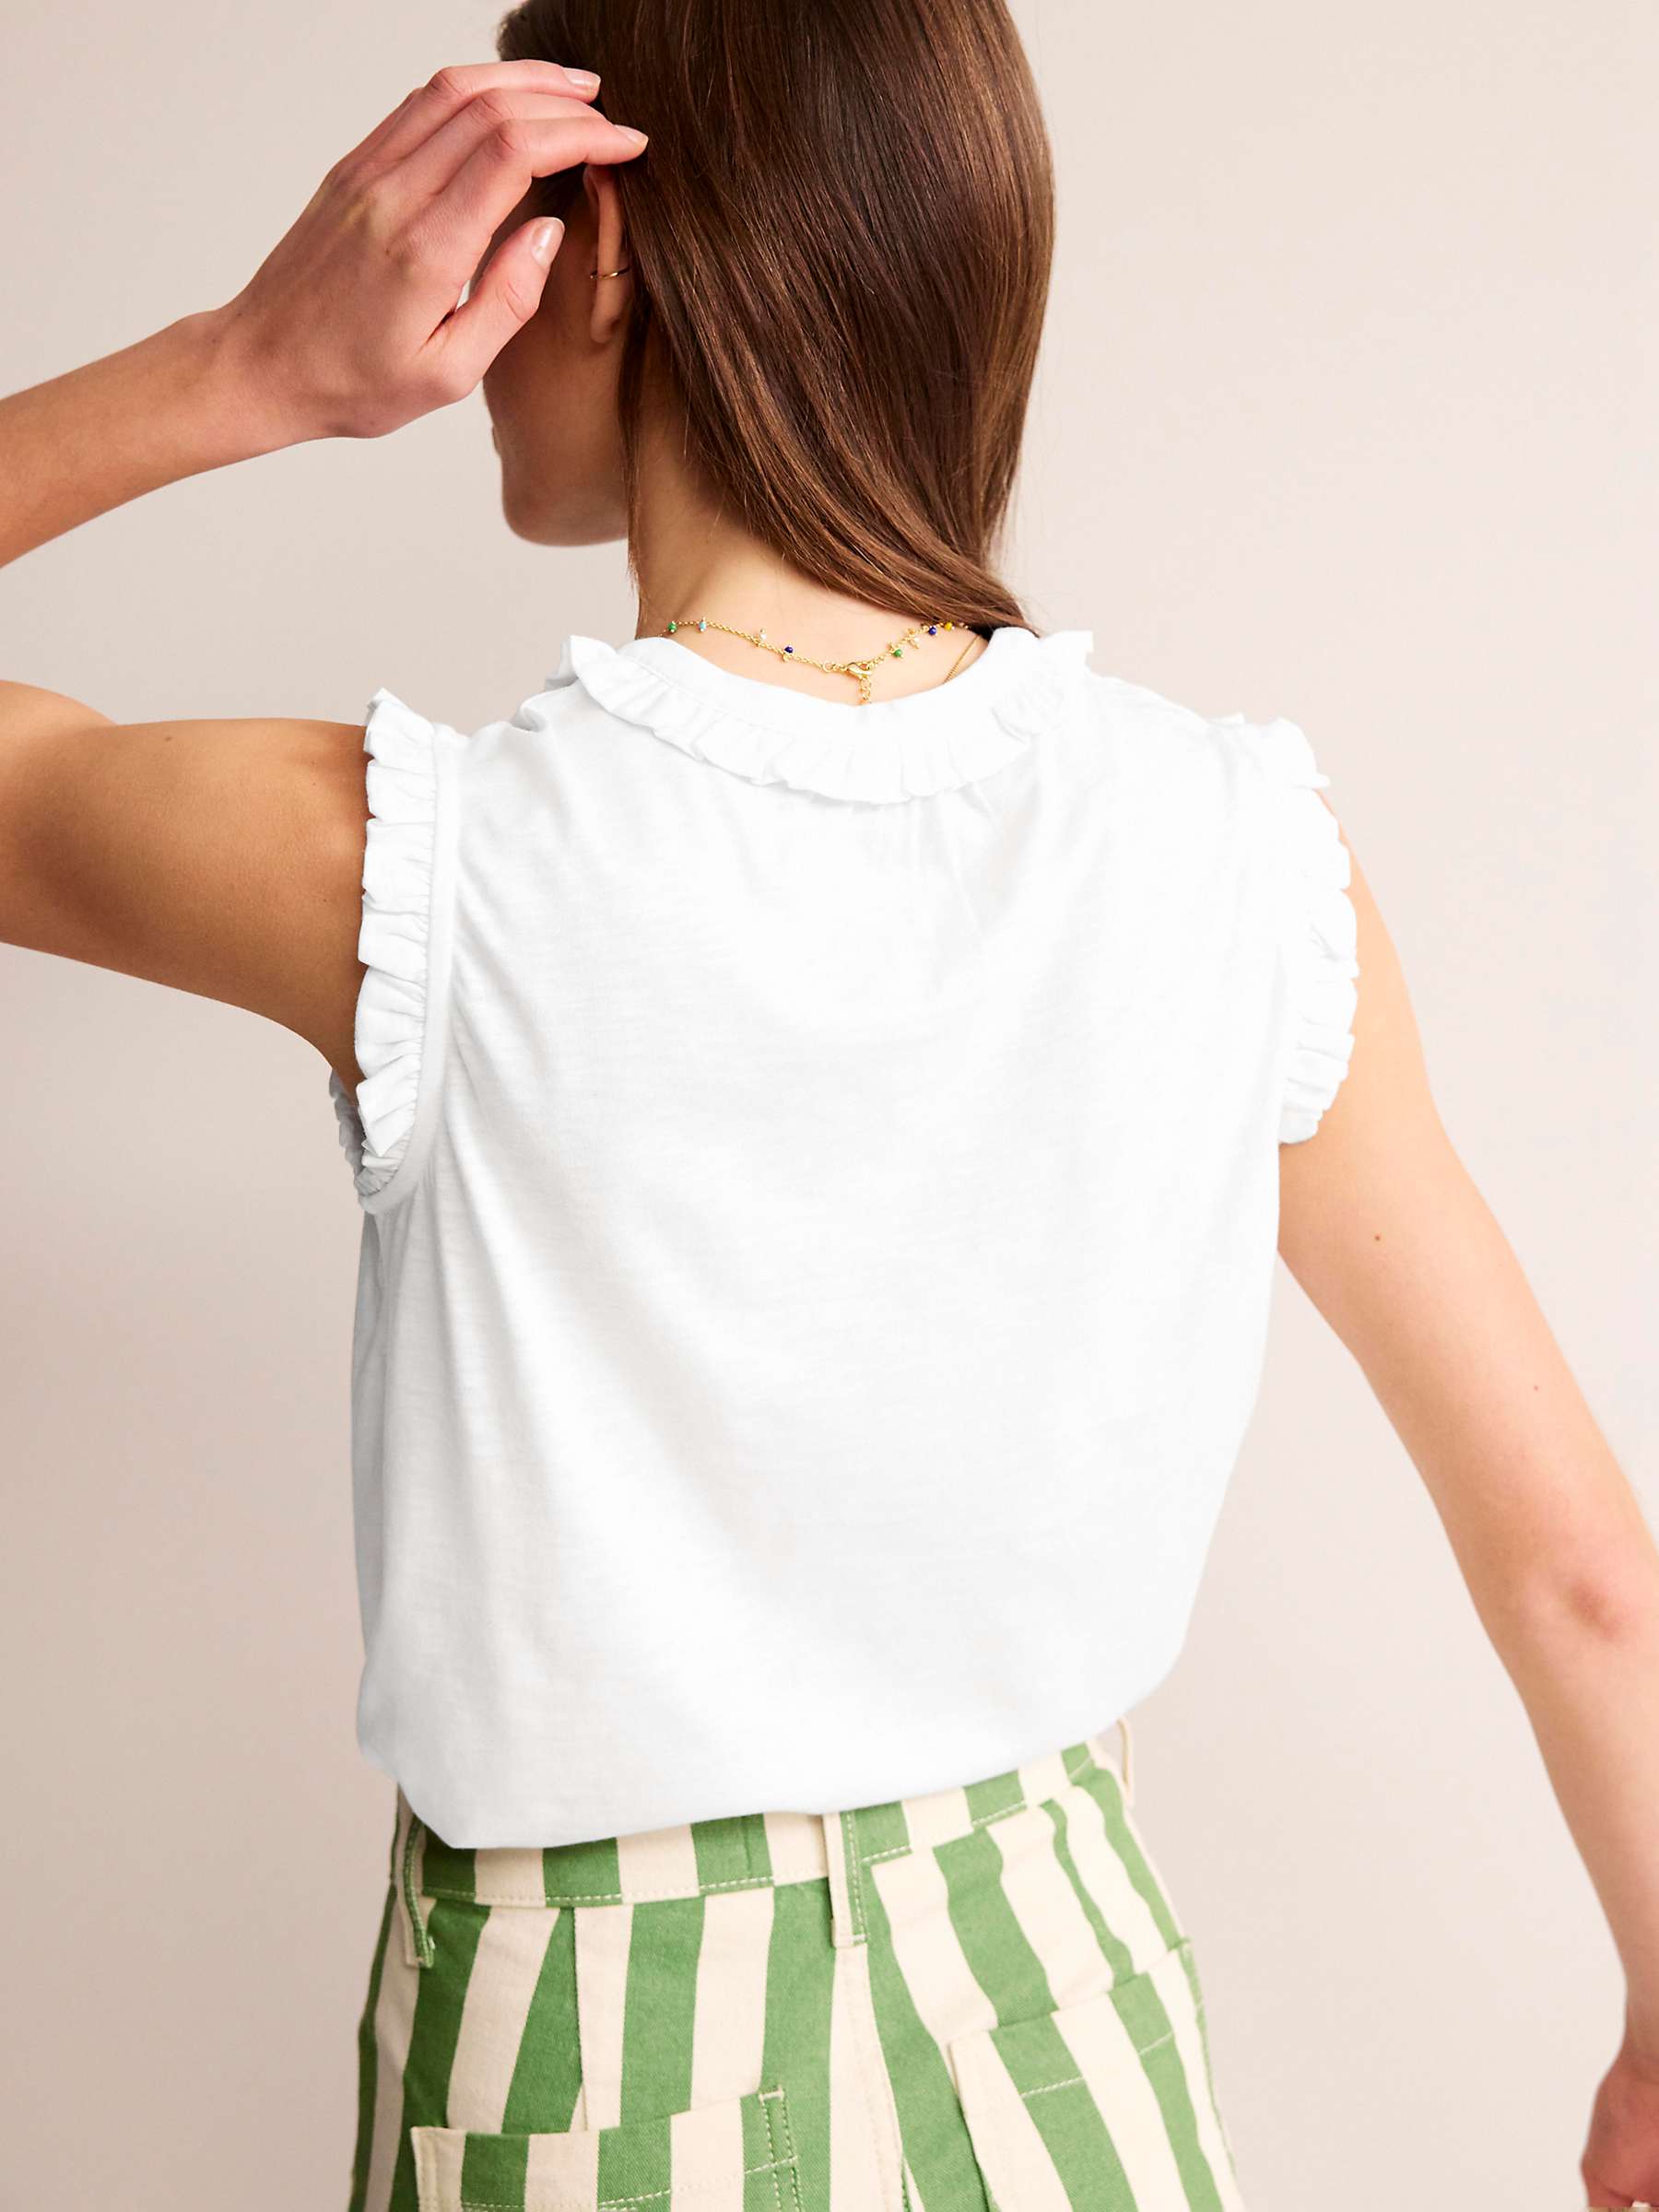 Buy Boden Olive Sleeveless Frill Detail Button Front Top Online at johnlewis.com